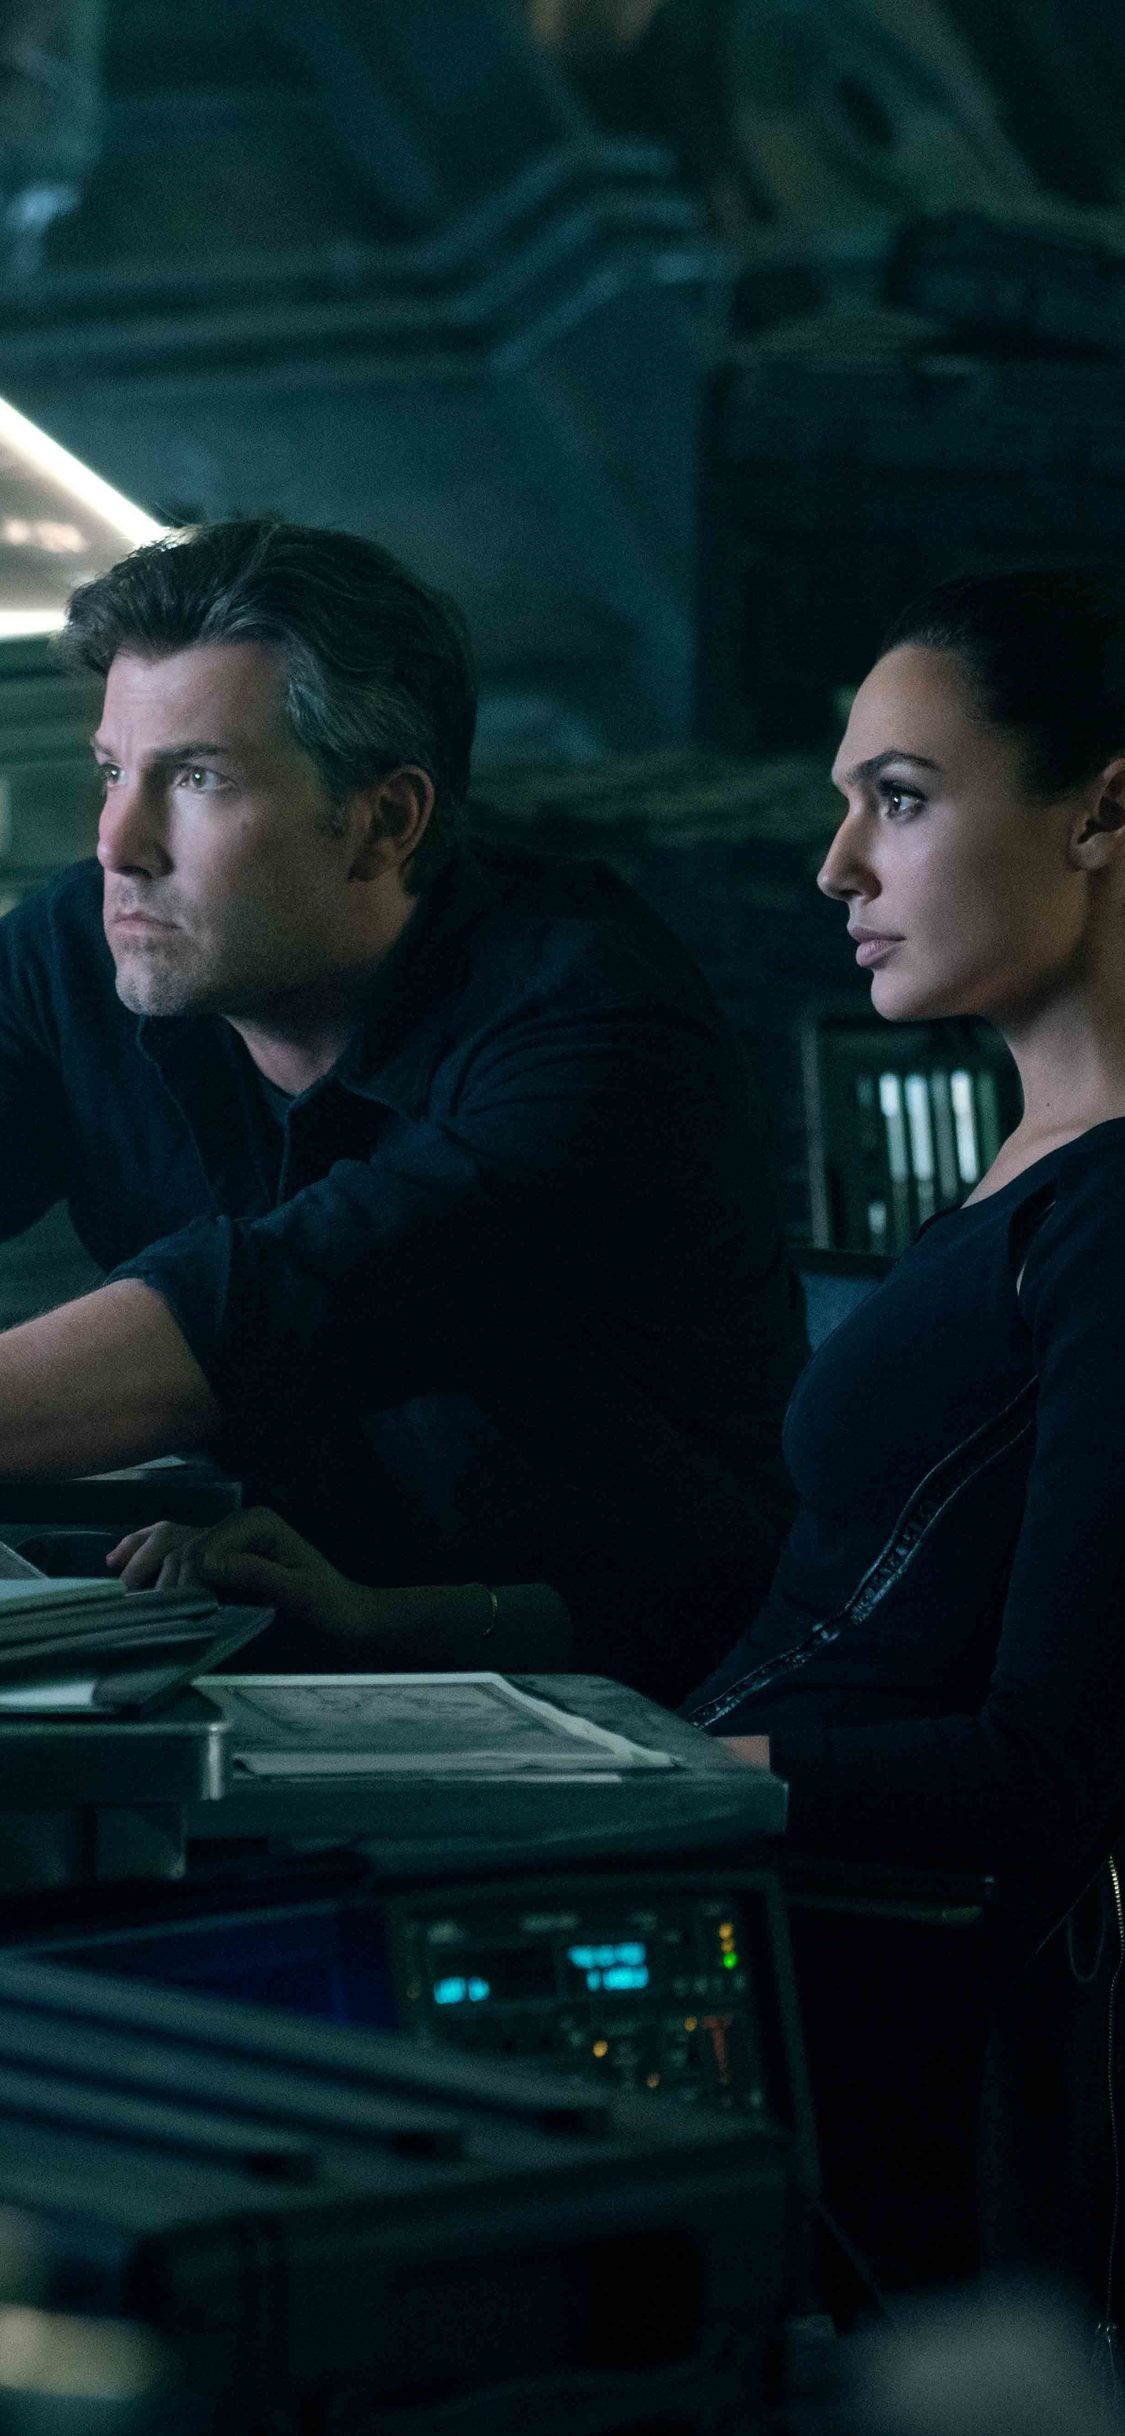 Ben Affleck And Gal Gadot In Justice League iPhone XS